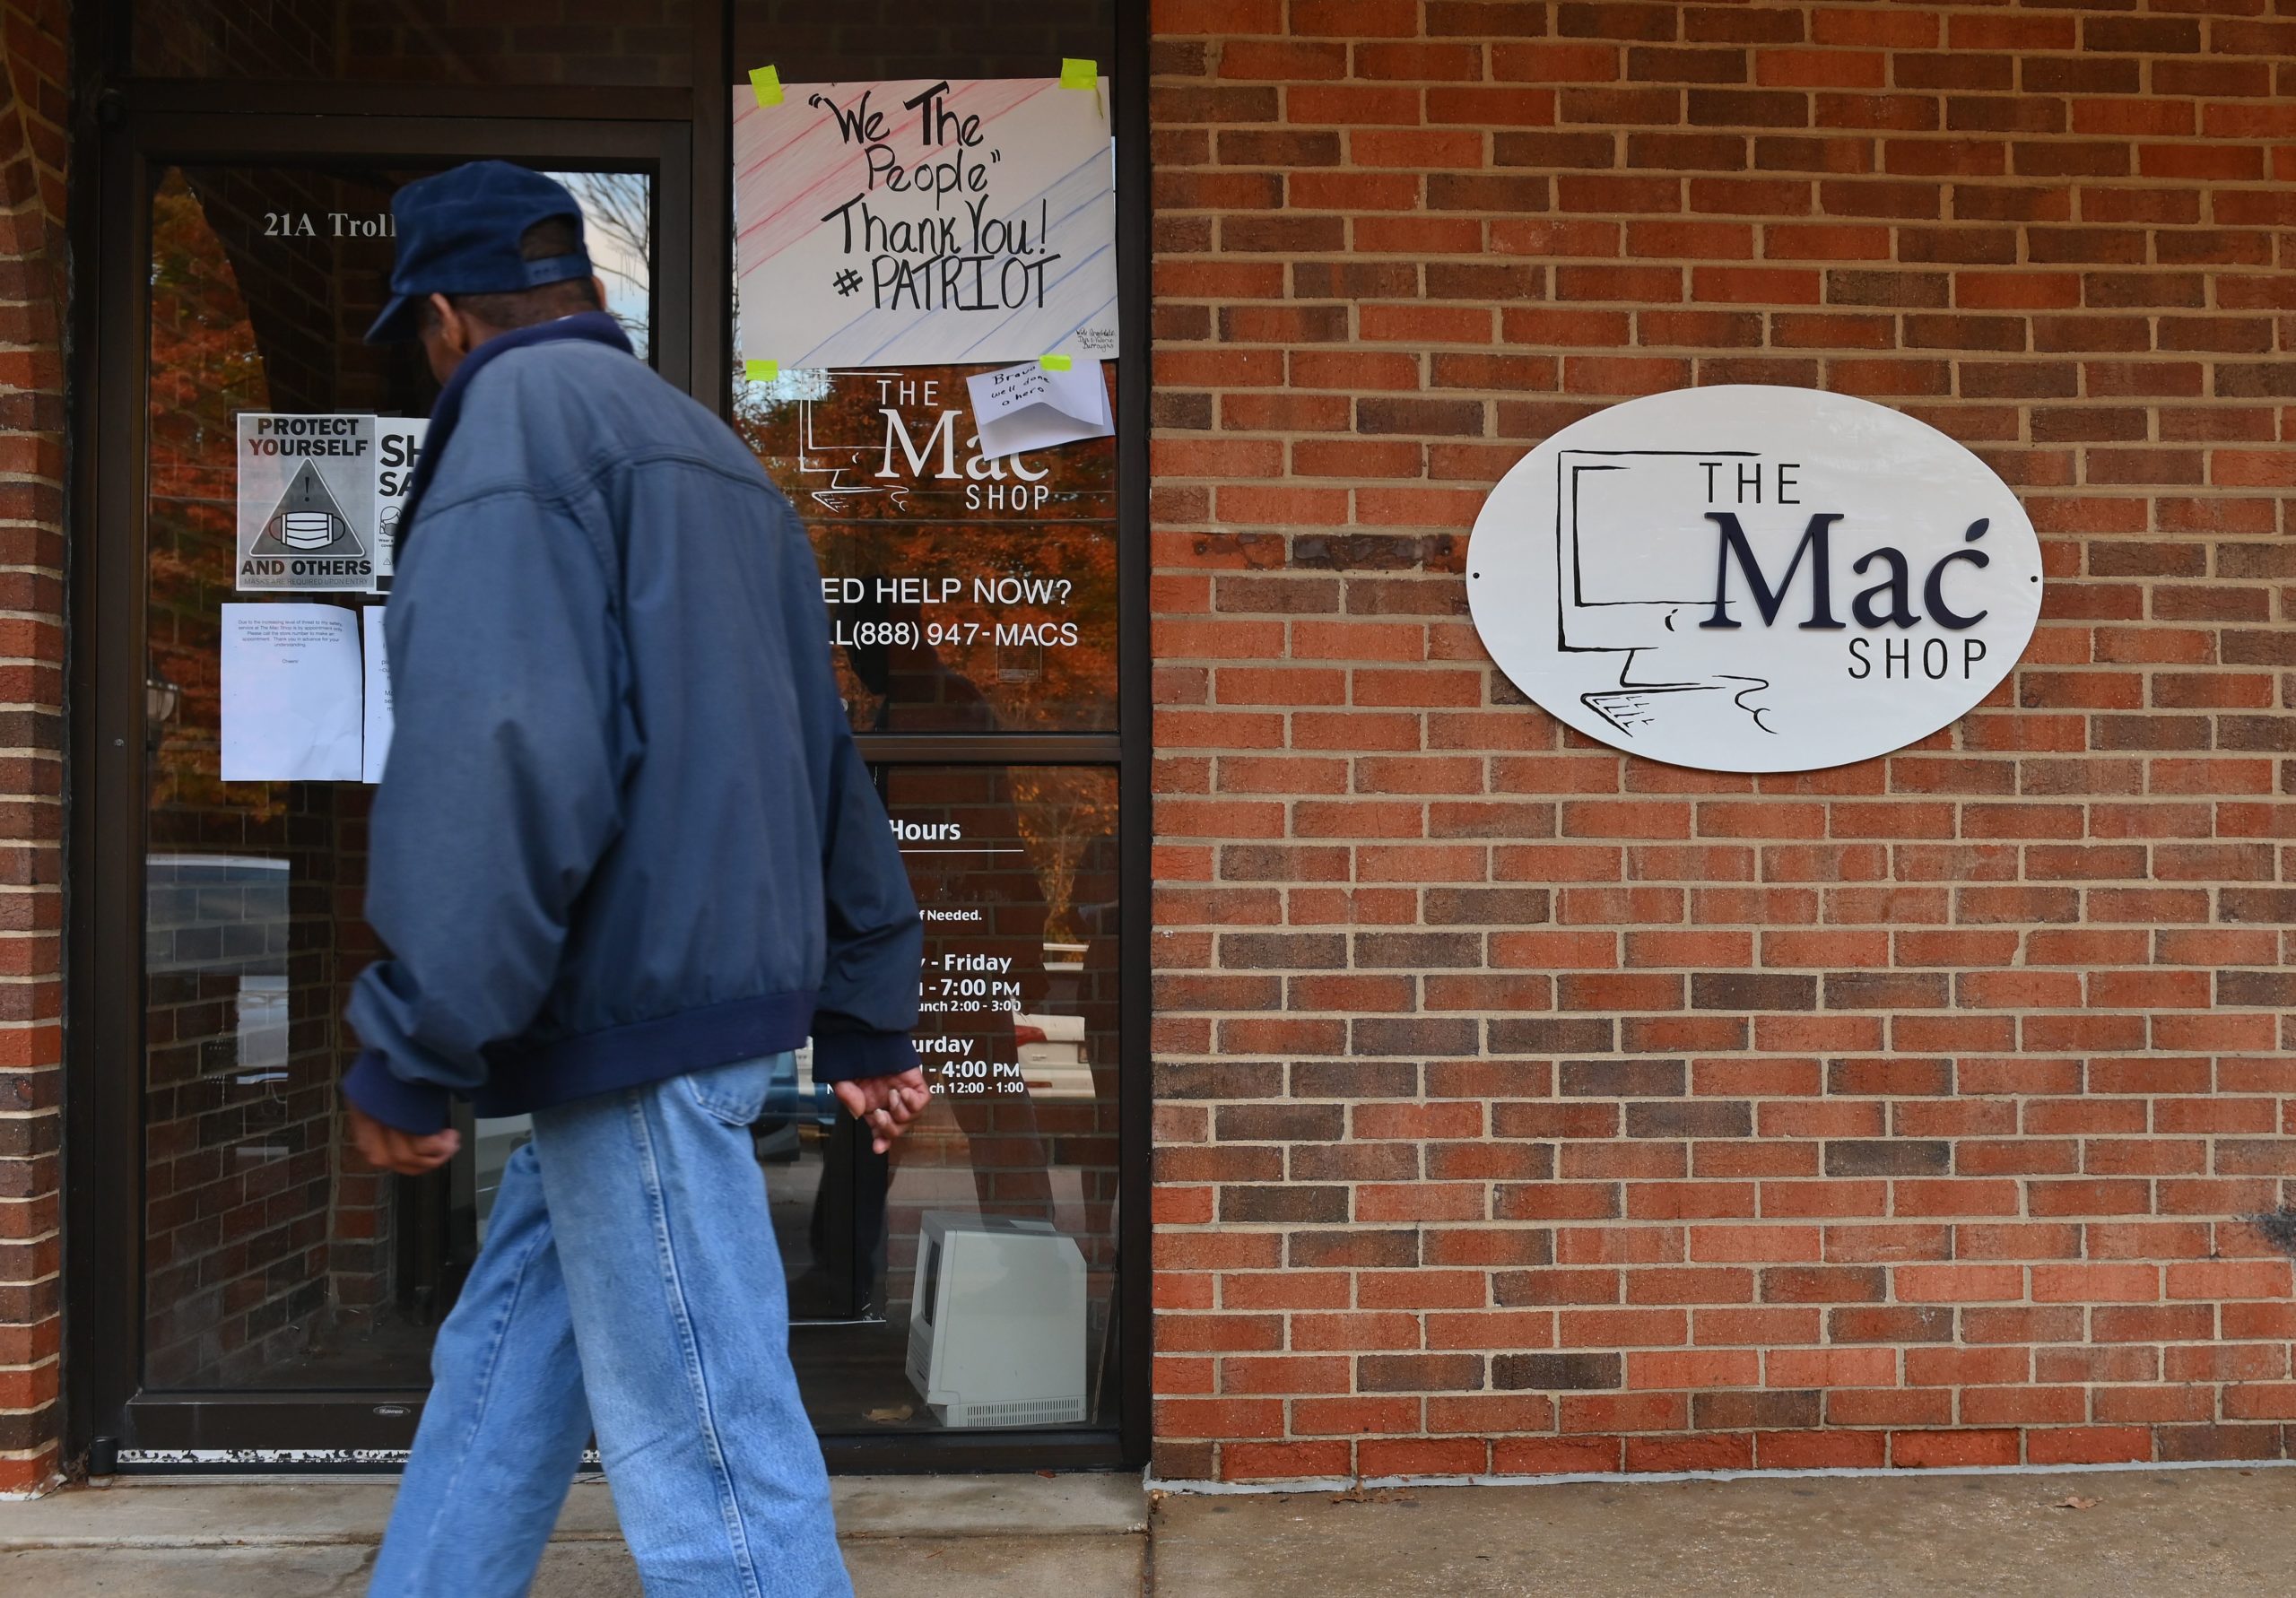 A man walks past "The Mac Shop" in Wilmington, Delaware on October 21, 2020. - The New York Post last week revived allegations against Hunter Biden with a story claiming it had obtained documents from a laptop owned by the former vice president's son which was brought in for repairs to the shop in April 2019 but never picked up. The Post claimed that emails found on the laptop showed that Hunter Biden introduced his father to a Burisma advisor, Vadym Pozharskyi, in 2015 and contradict Joe Biden's claims that he never spoke to his son about his overseas business dealings. The Post said the shop owner handed the laptop over to the FBI and also made a copy of the hard drive and gave it to former New York mayor Rudy Giuliani. (Photo by Angela Weiss / AFP) (Photo by ANGELA WEISS/AFP via Getty Images)